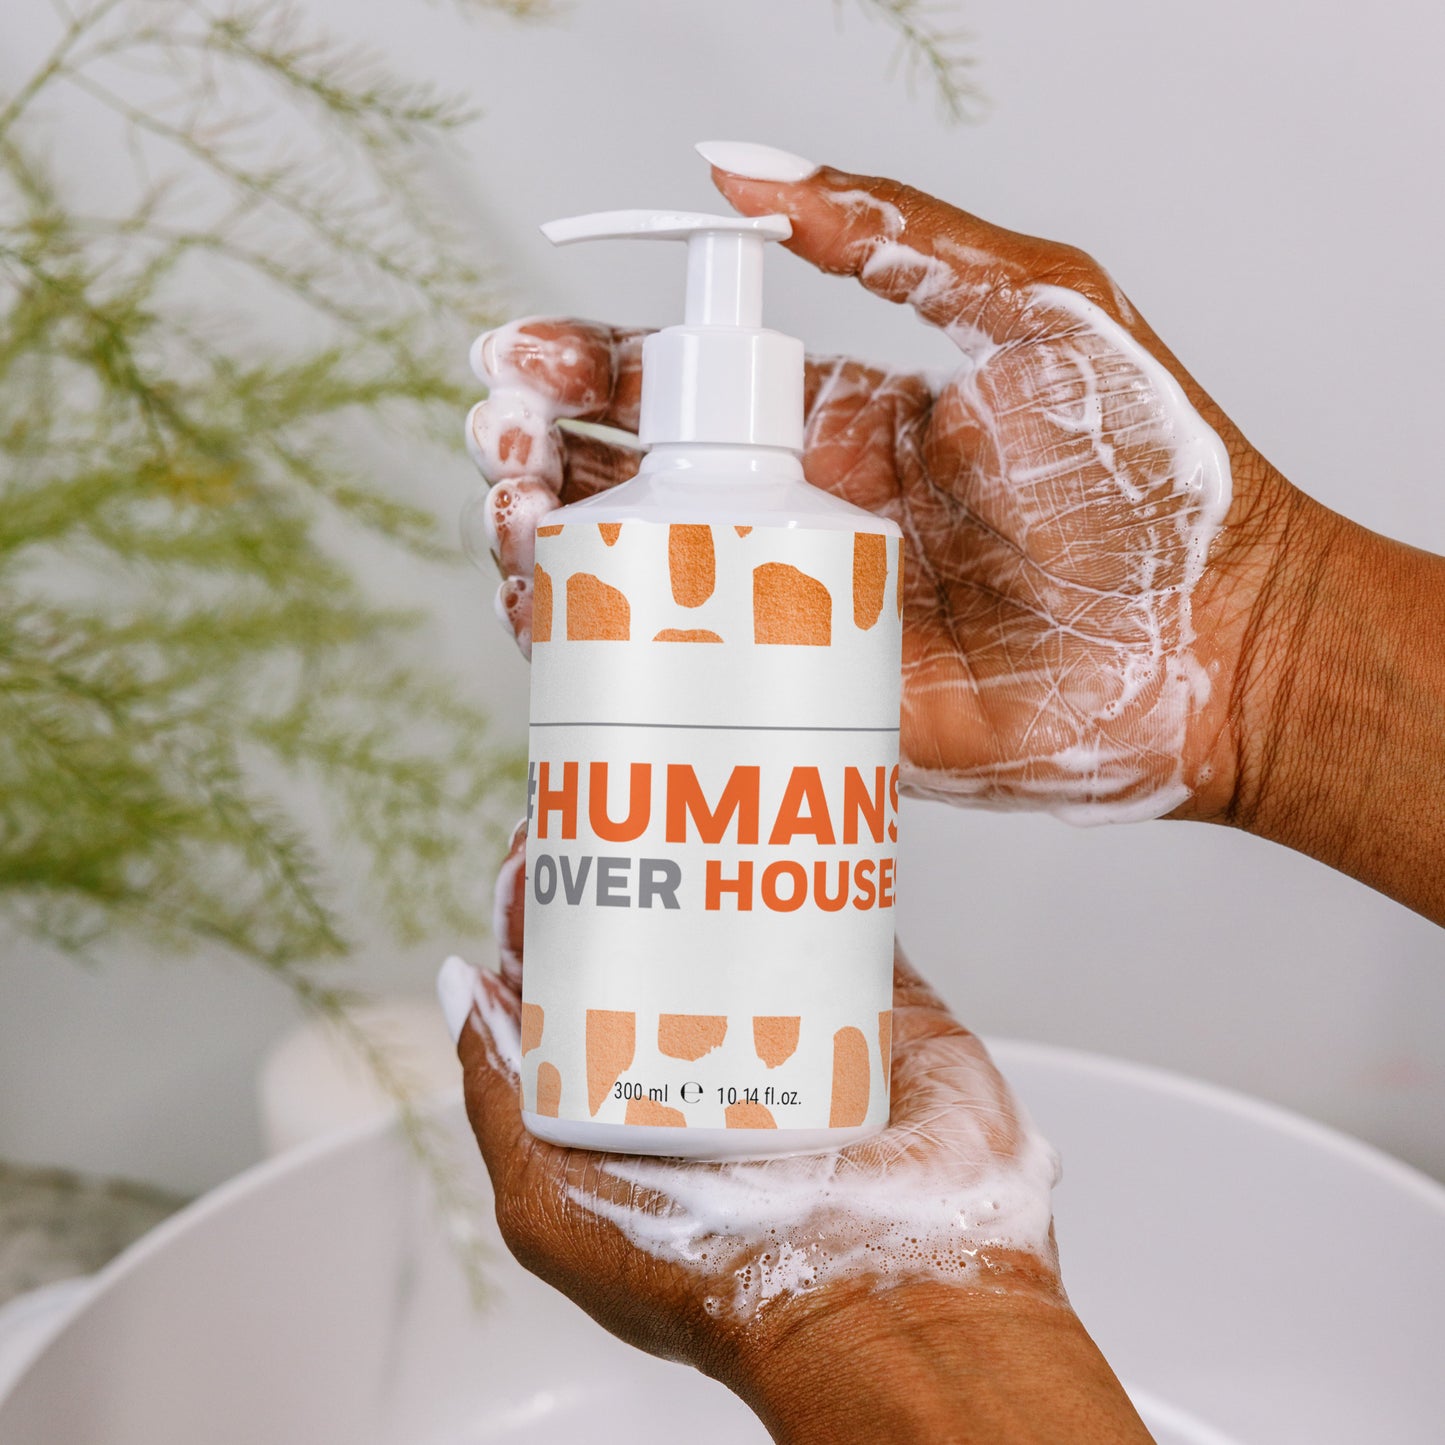 Humans Over Houses Floral hand & body wash